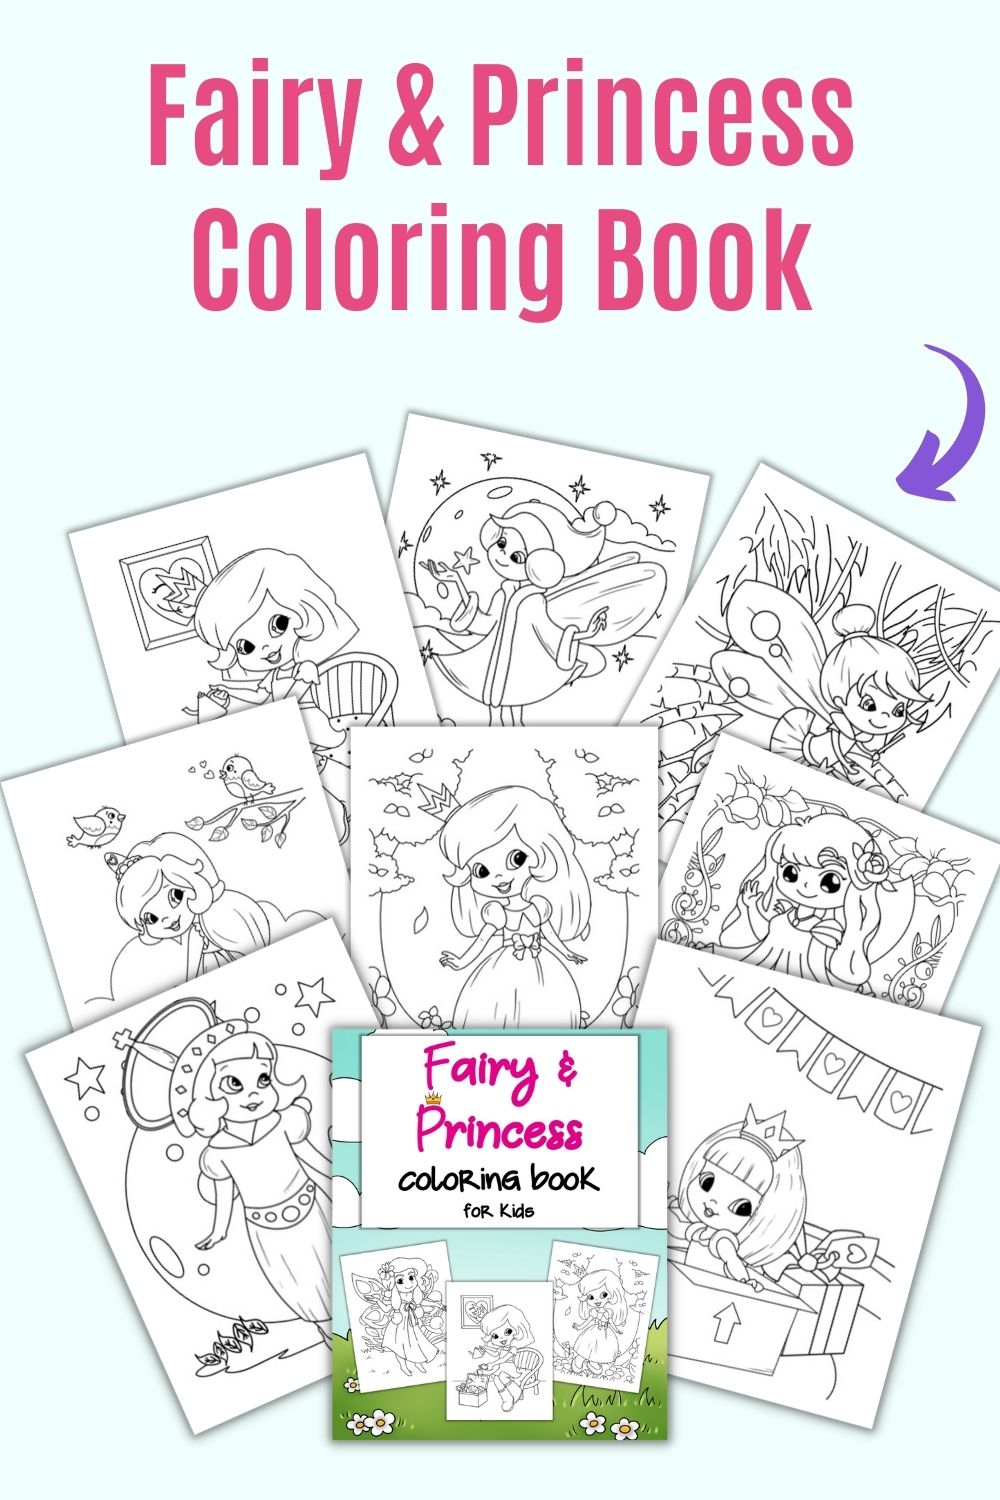 Text "Fairy & princess coloring book" above a preview of a cover and 8 pages from  coloring book for children with fairies and princesses